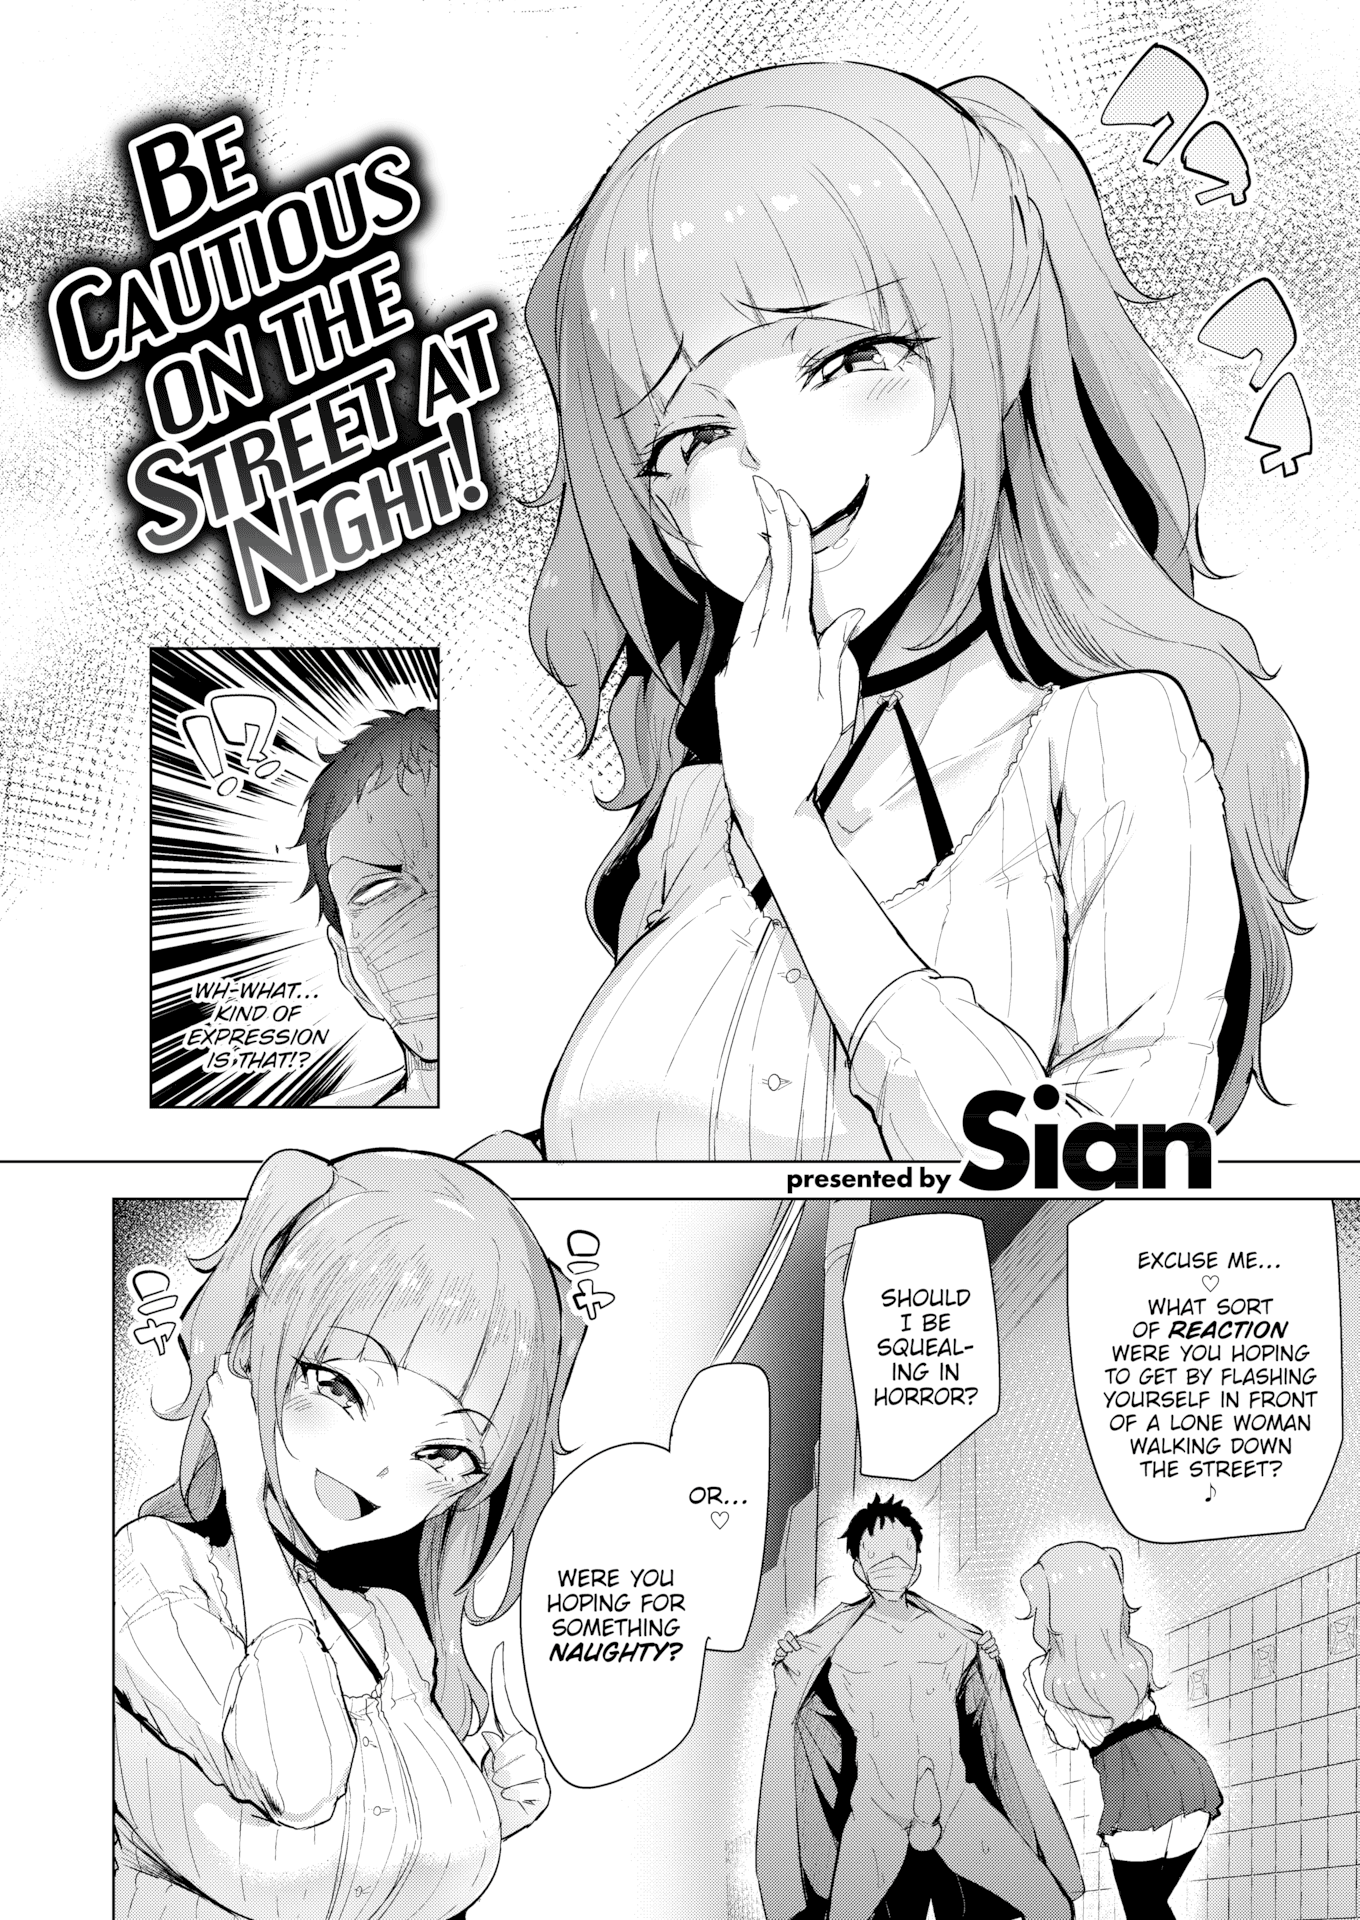 Be cautious on the street at night nhentai